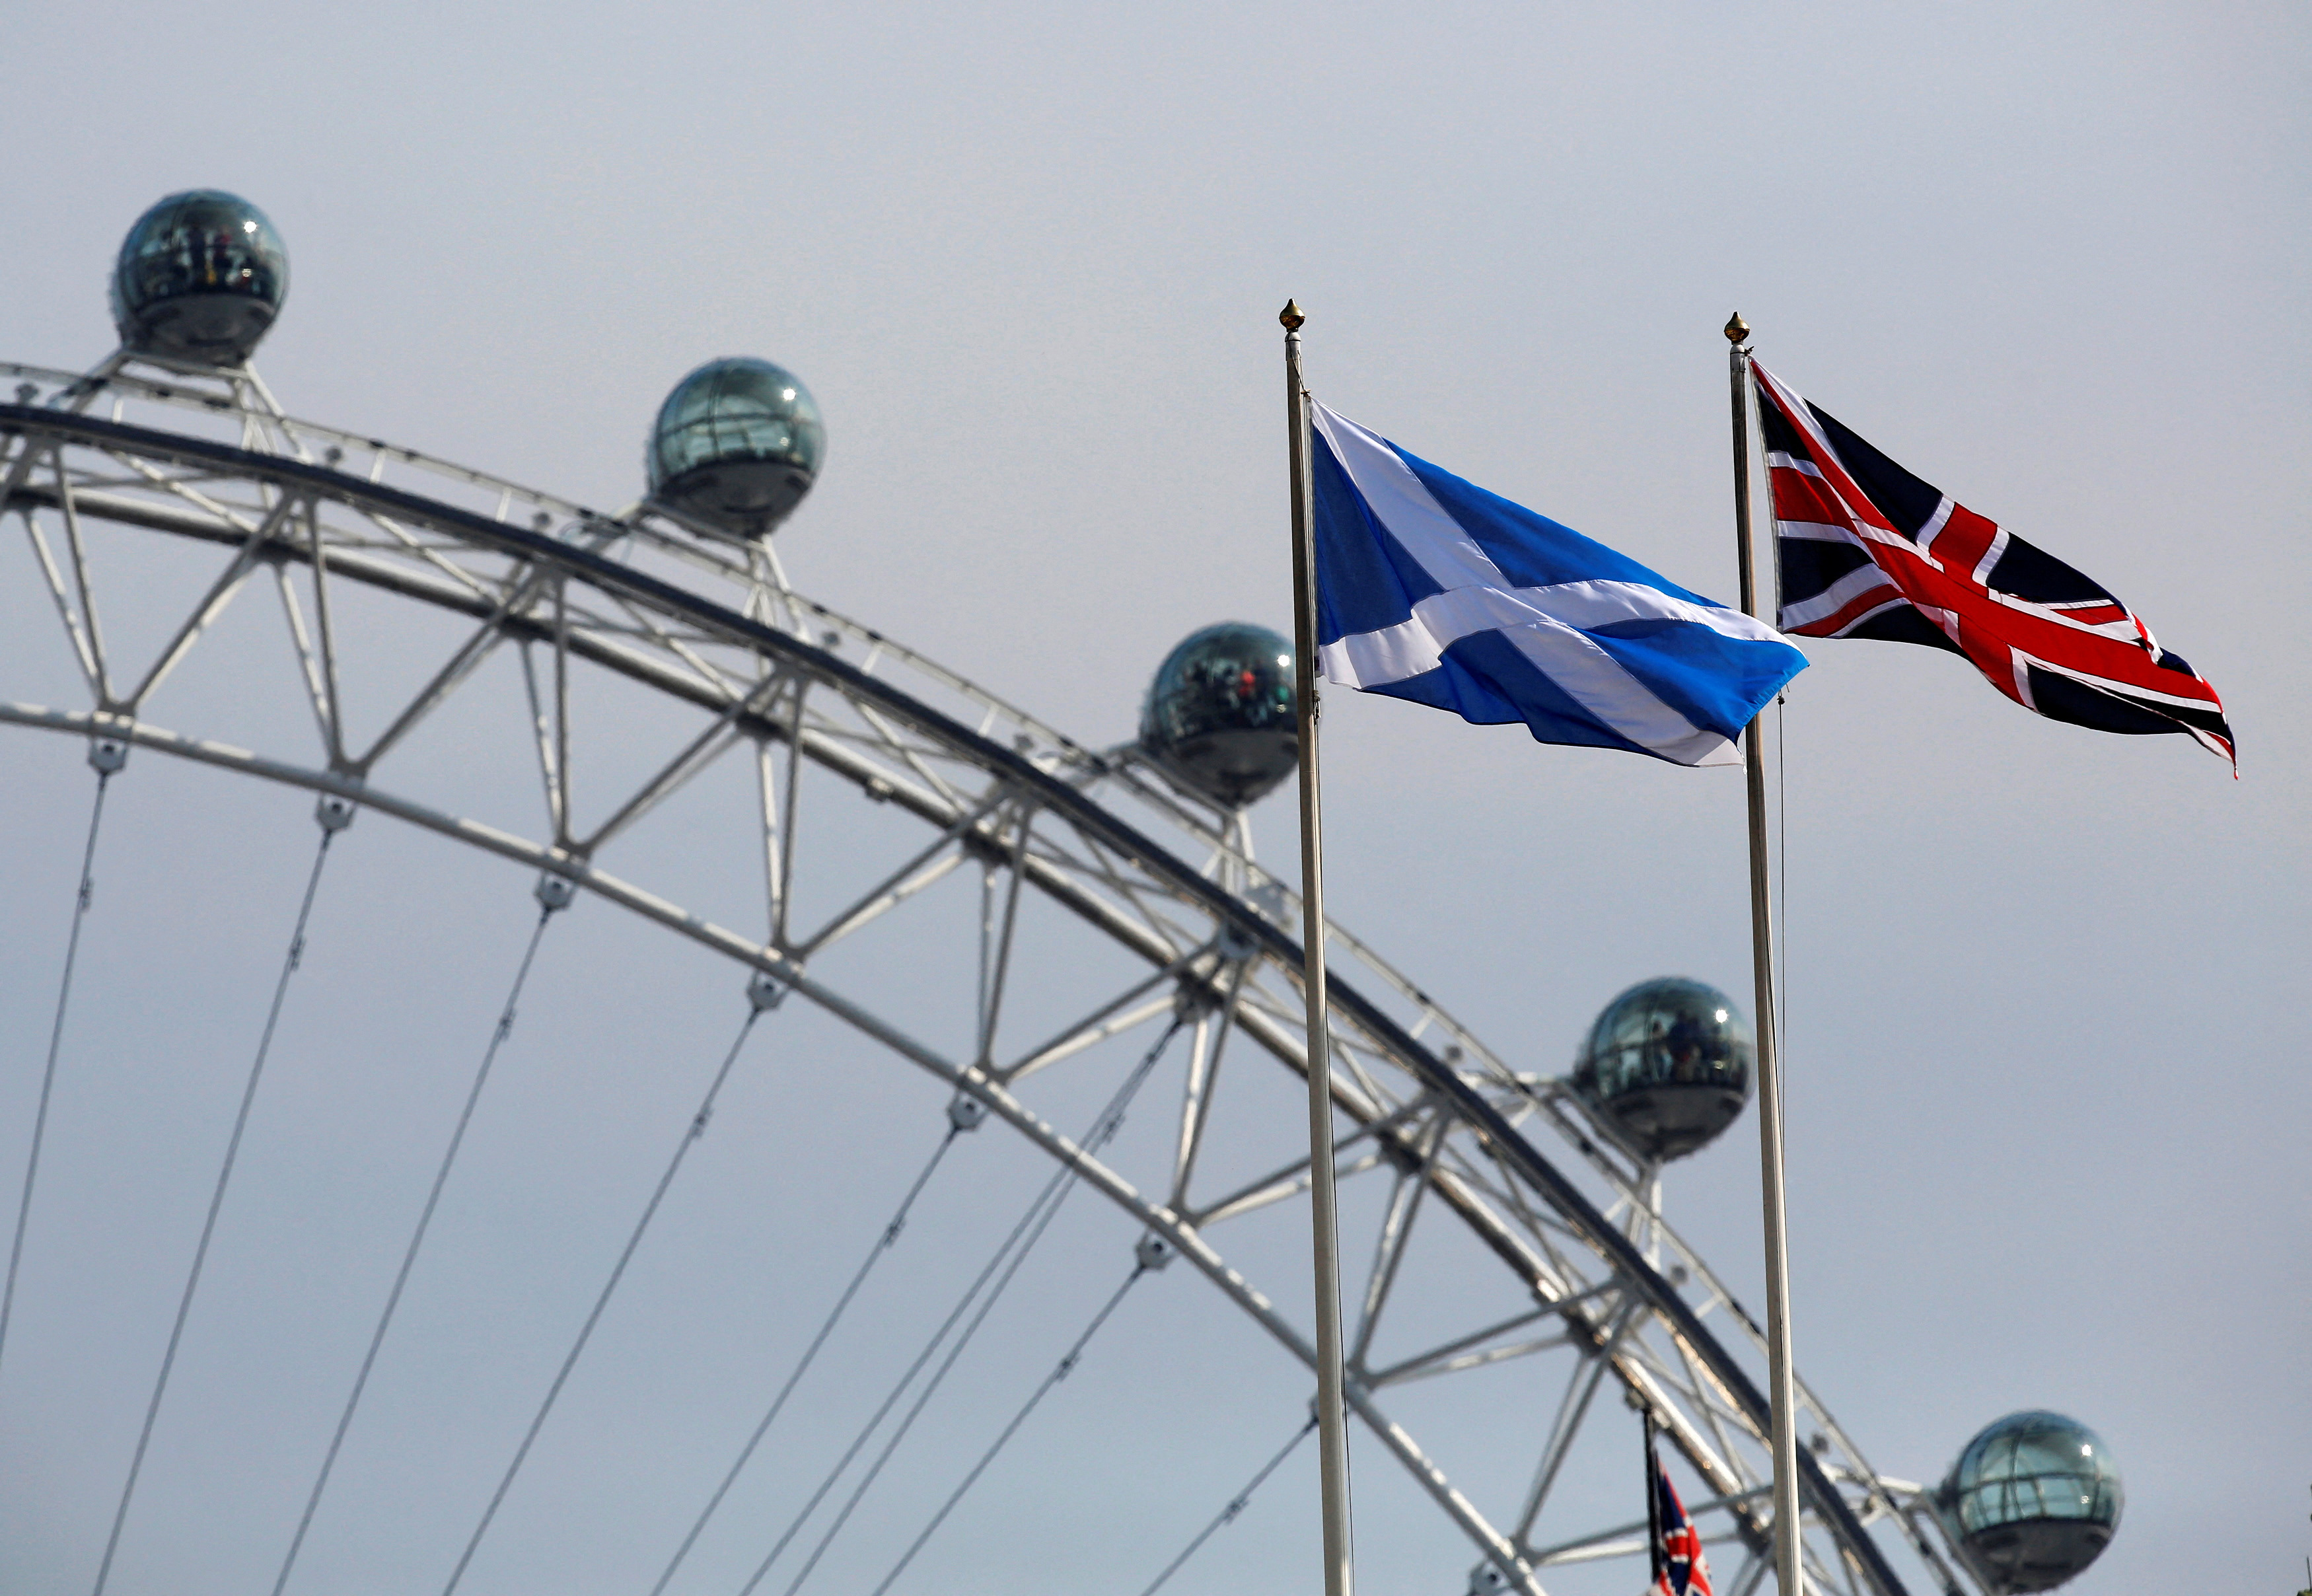 A Scottish Saltire flag and British Union flag fly together with the London Eye behind in London